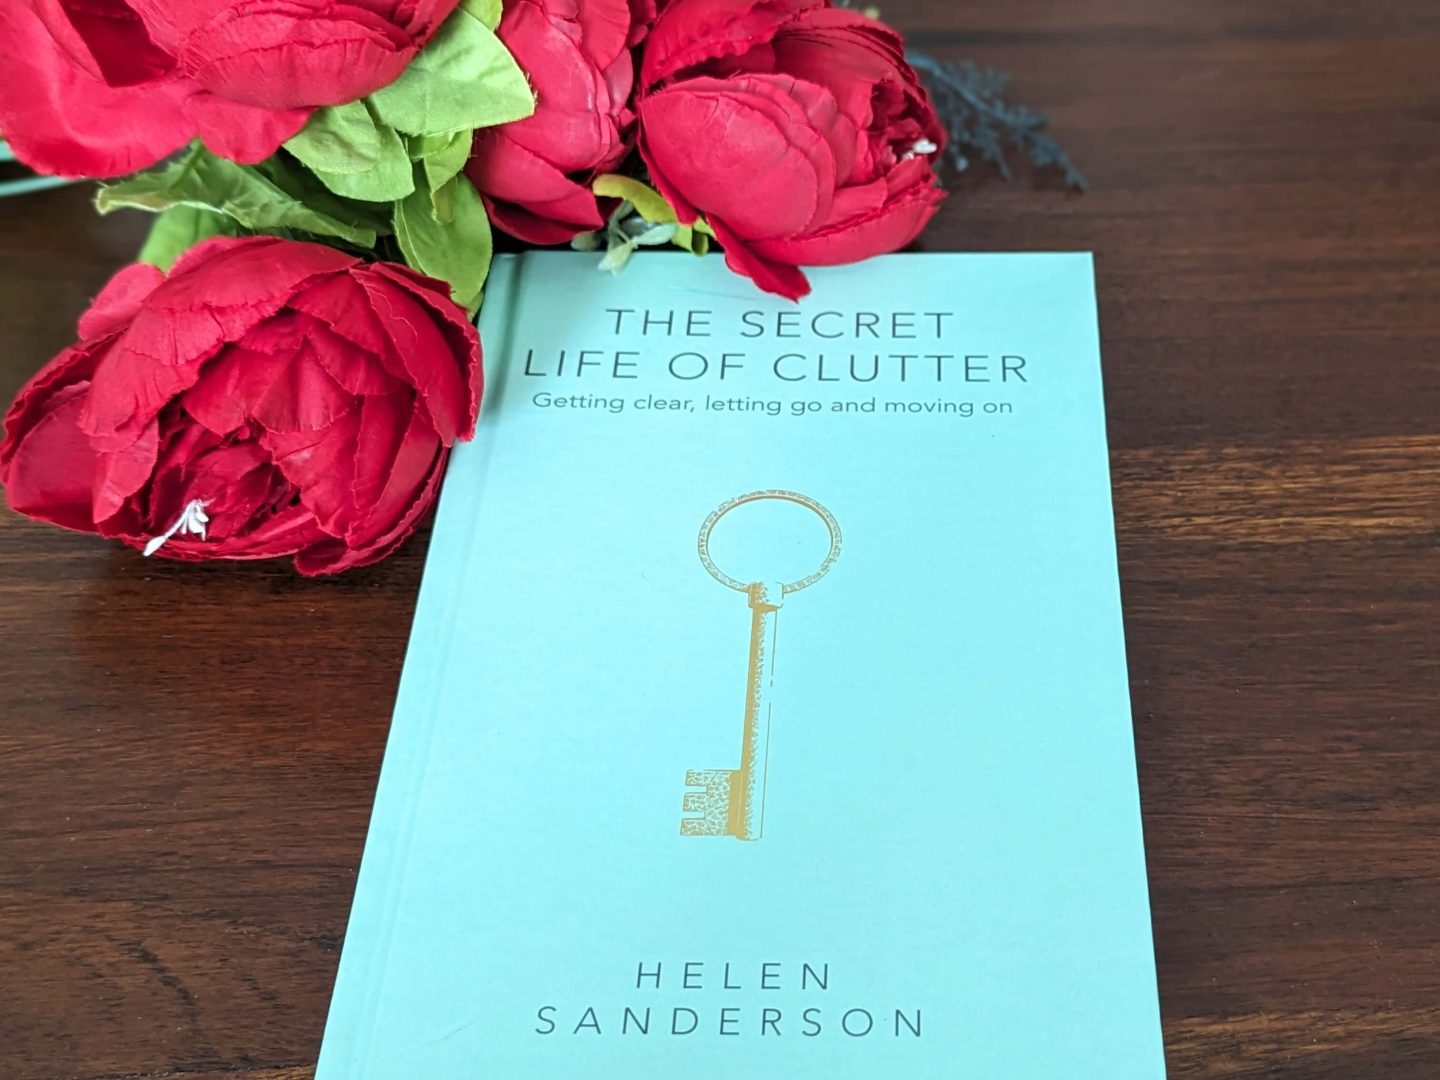 The secret life of clutter by Helen Sanderson - a book with a blue cover with a key on the front - displayed against a wooden background beside red flowers